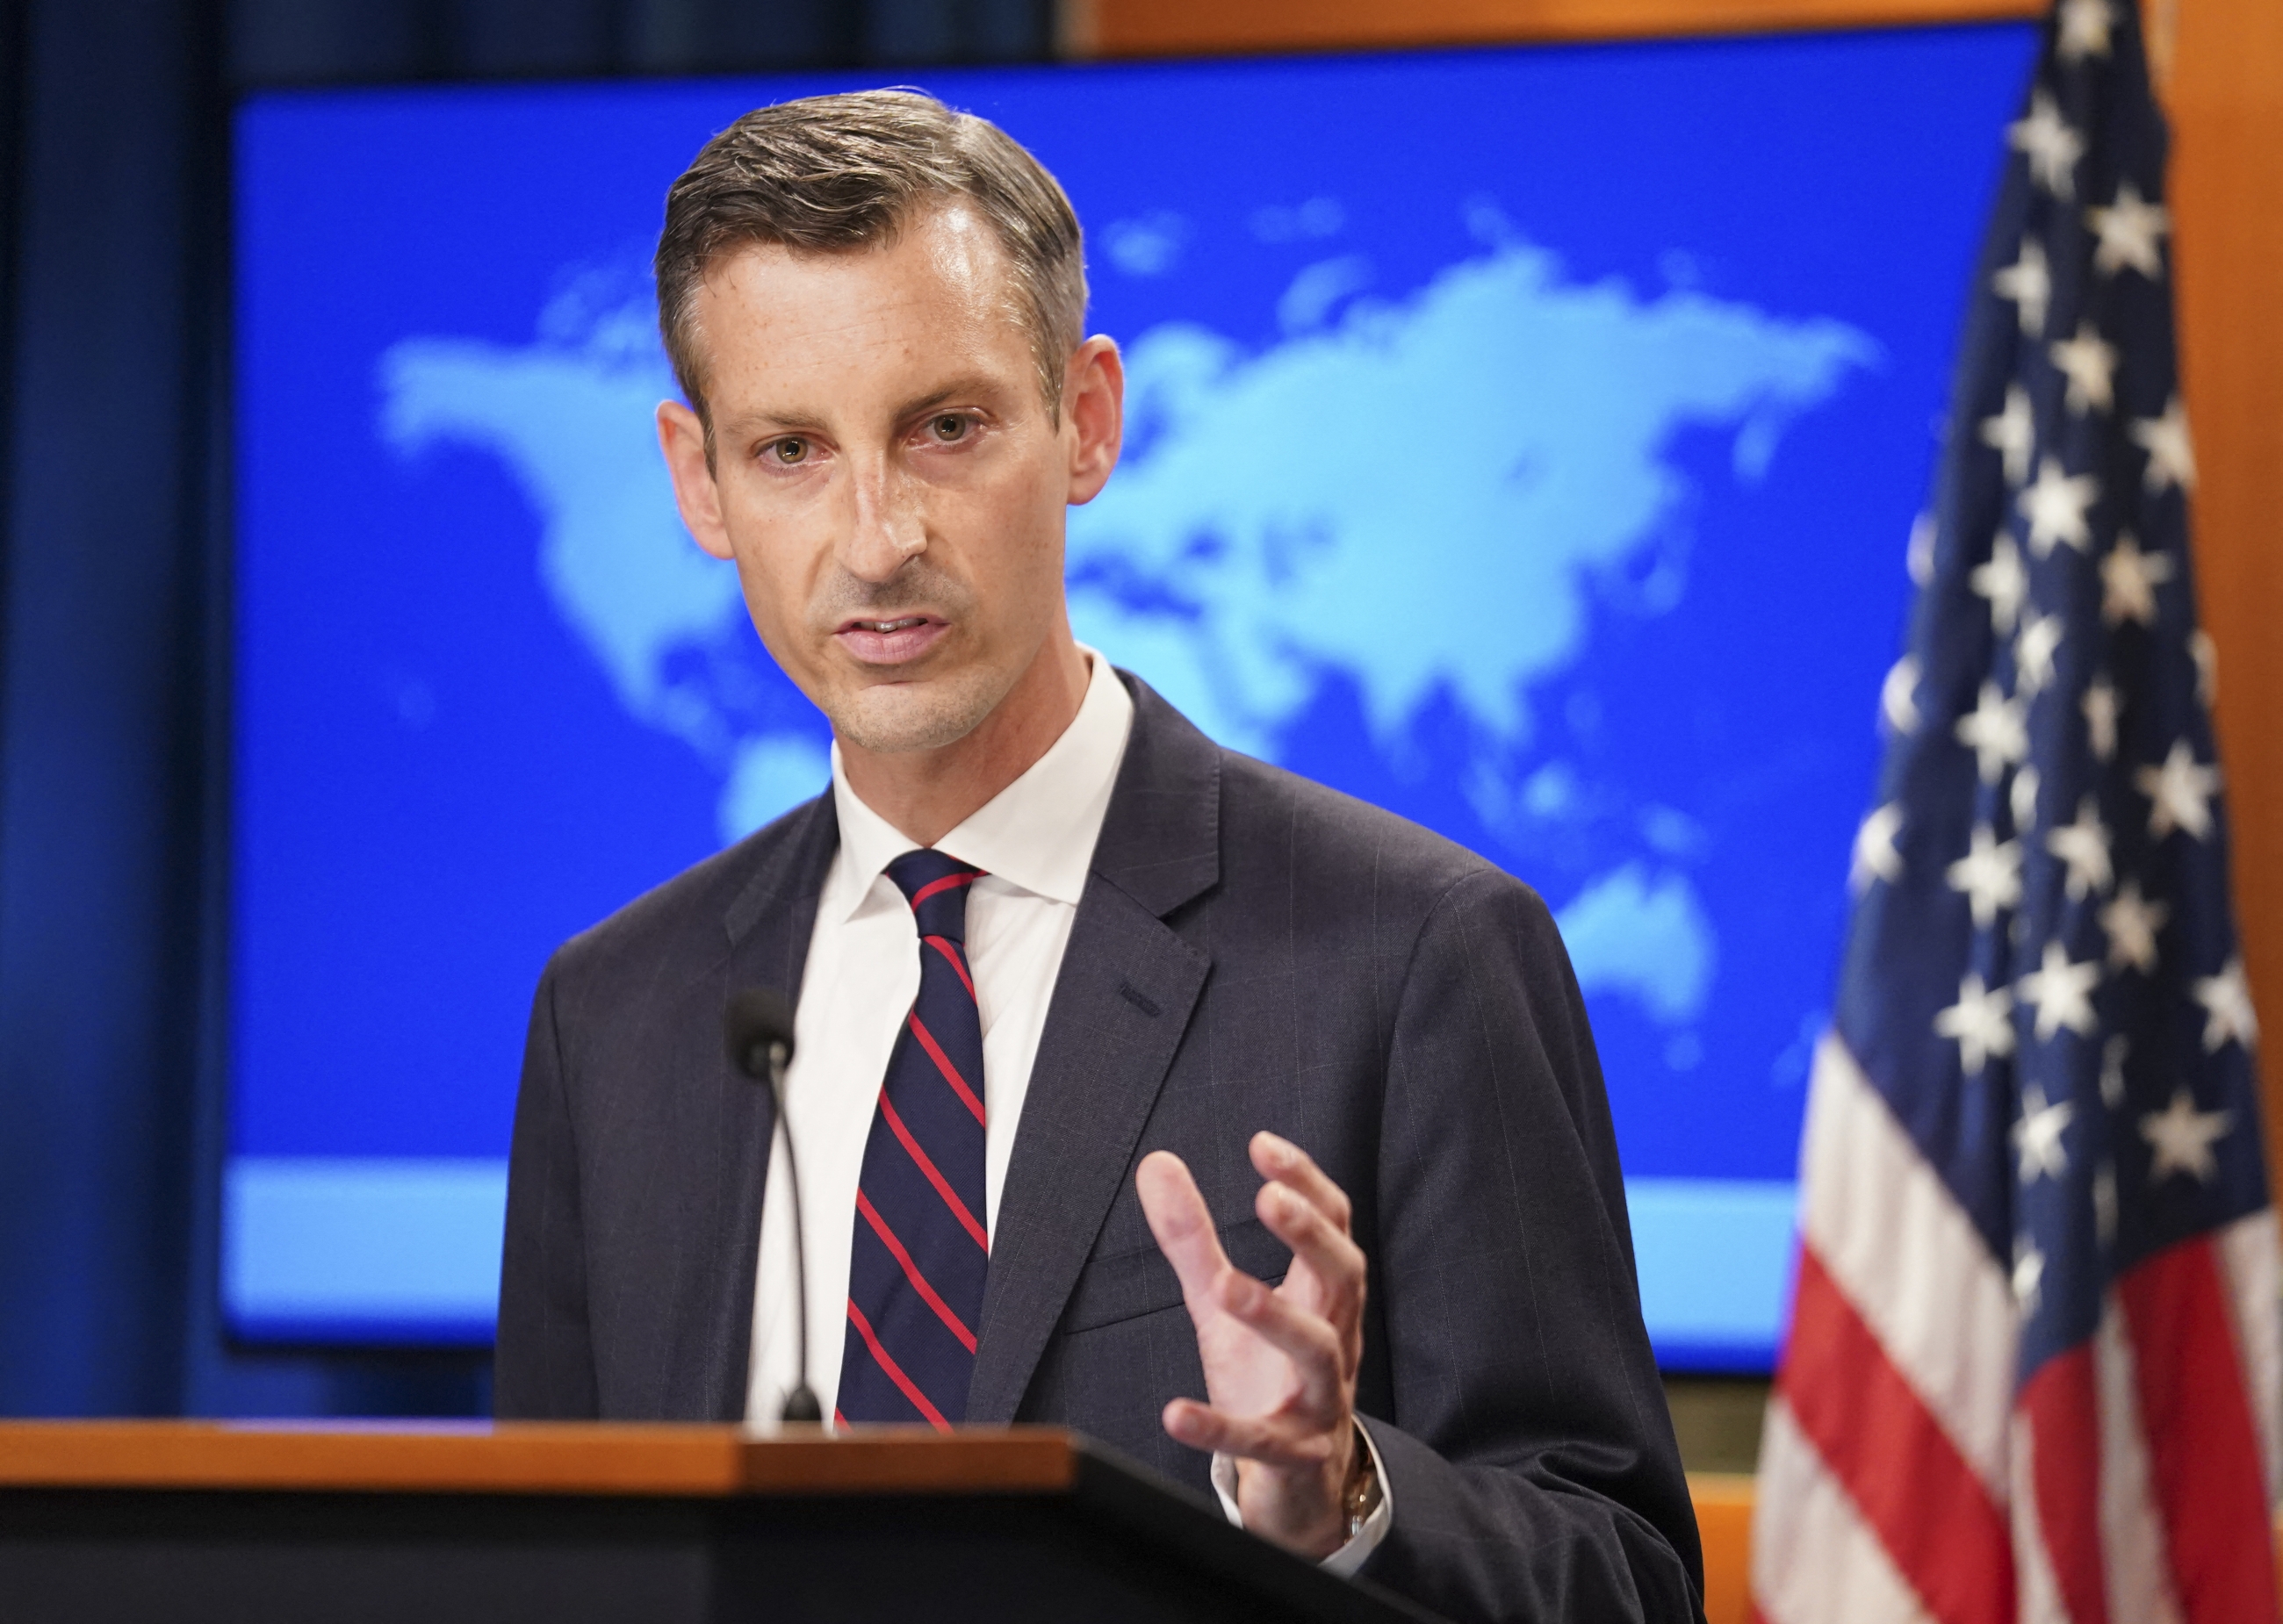 State Department spokesperson Ned Price announced on Monday the US would be suspending $700m in emergency assistance to Sudan.